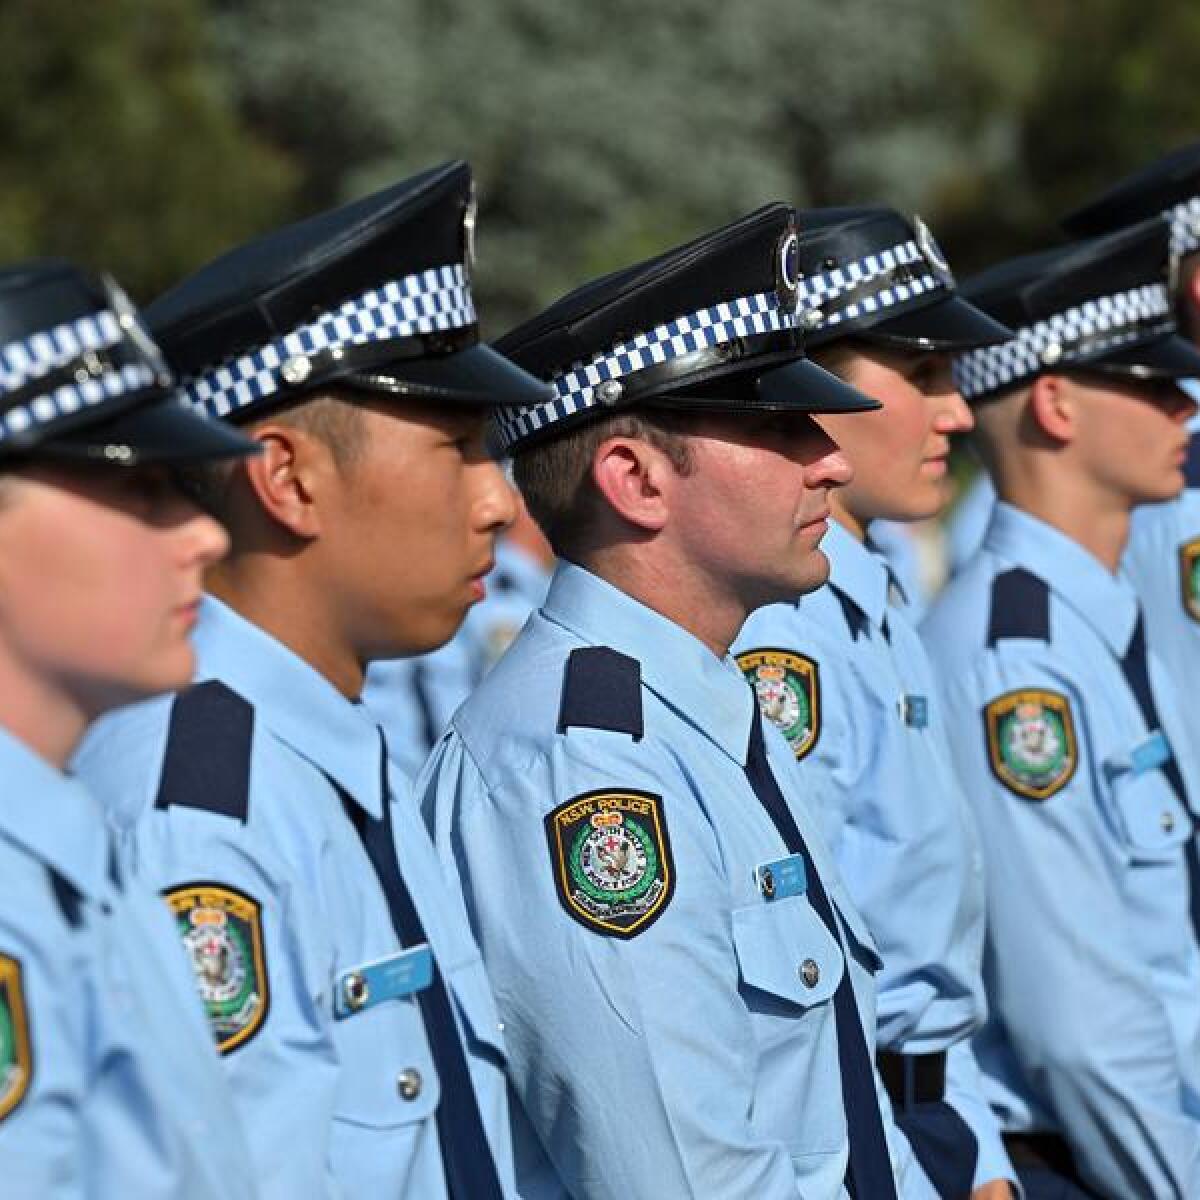 NSW Police cadets.